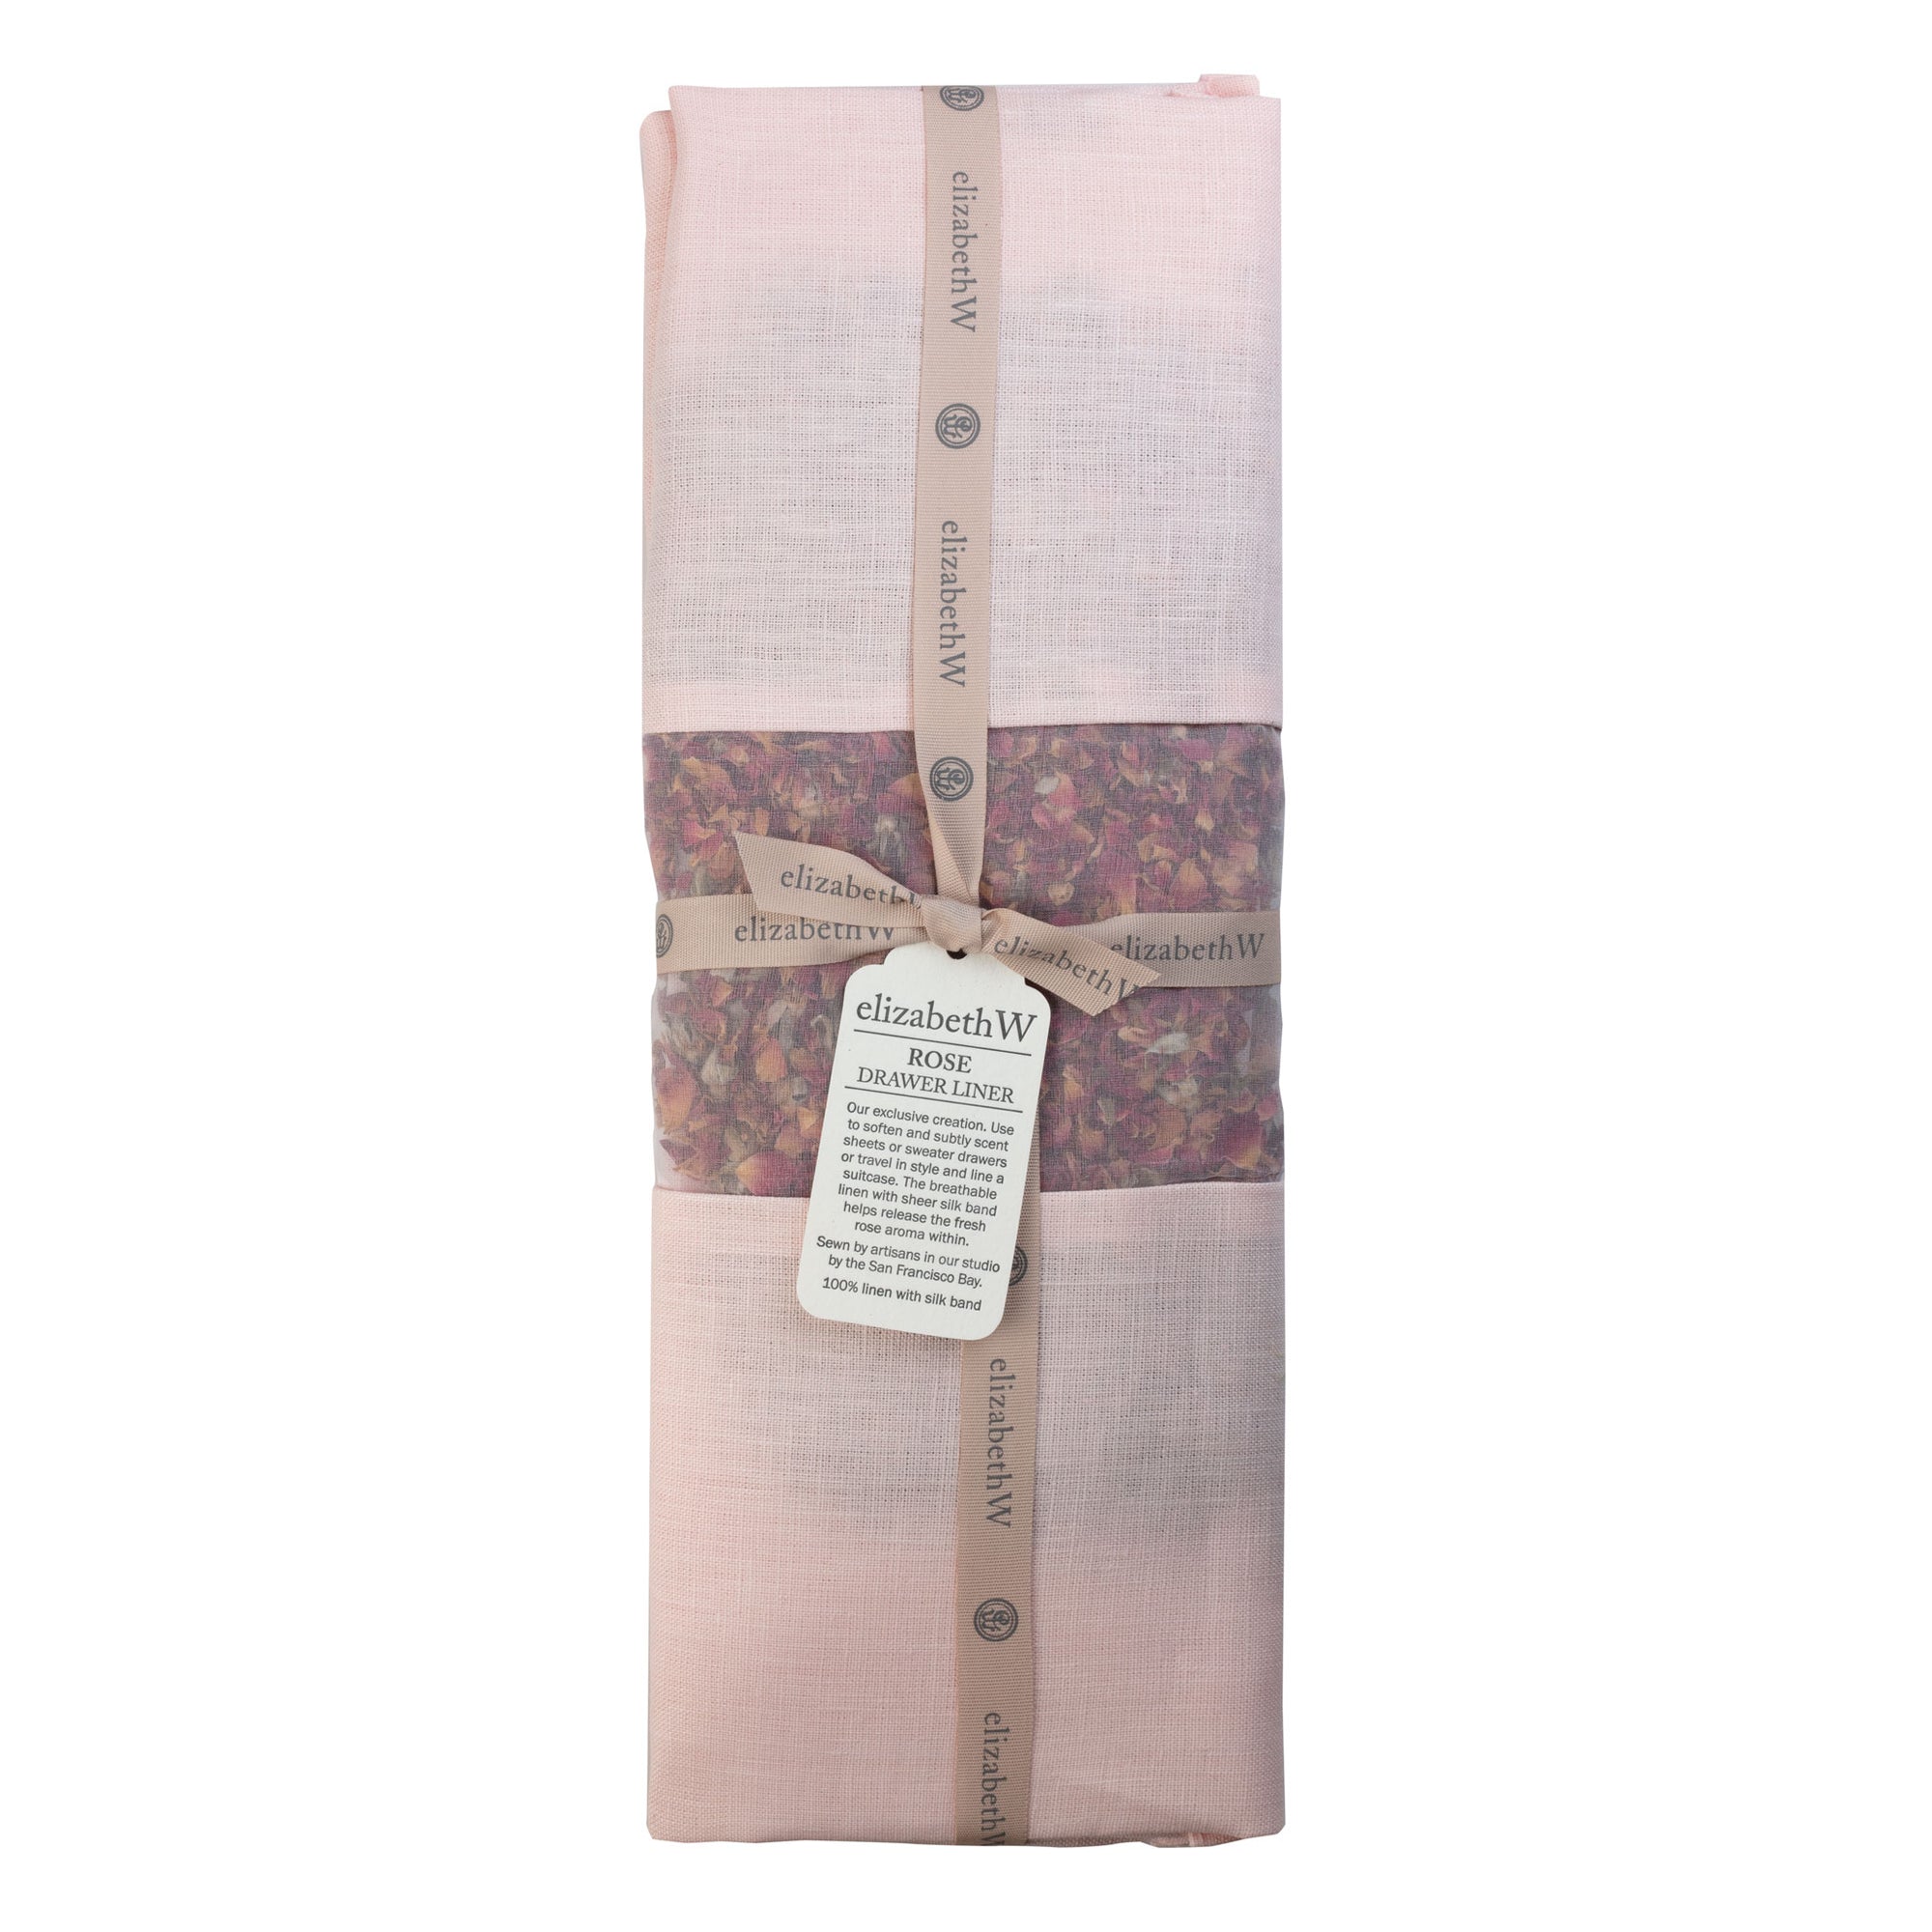 Rose Drawer Liner in a pink colored Linen